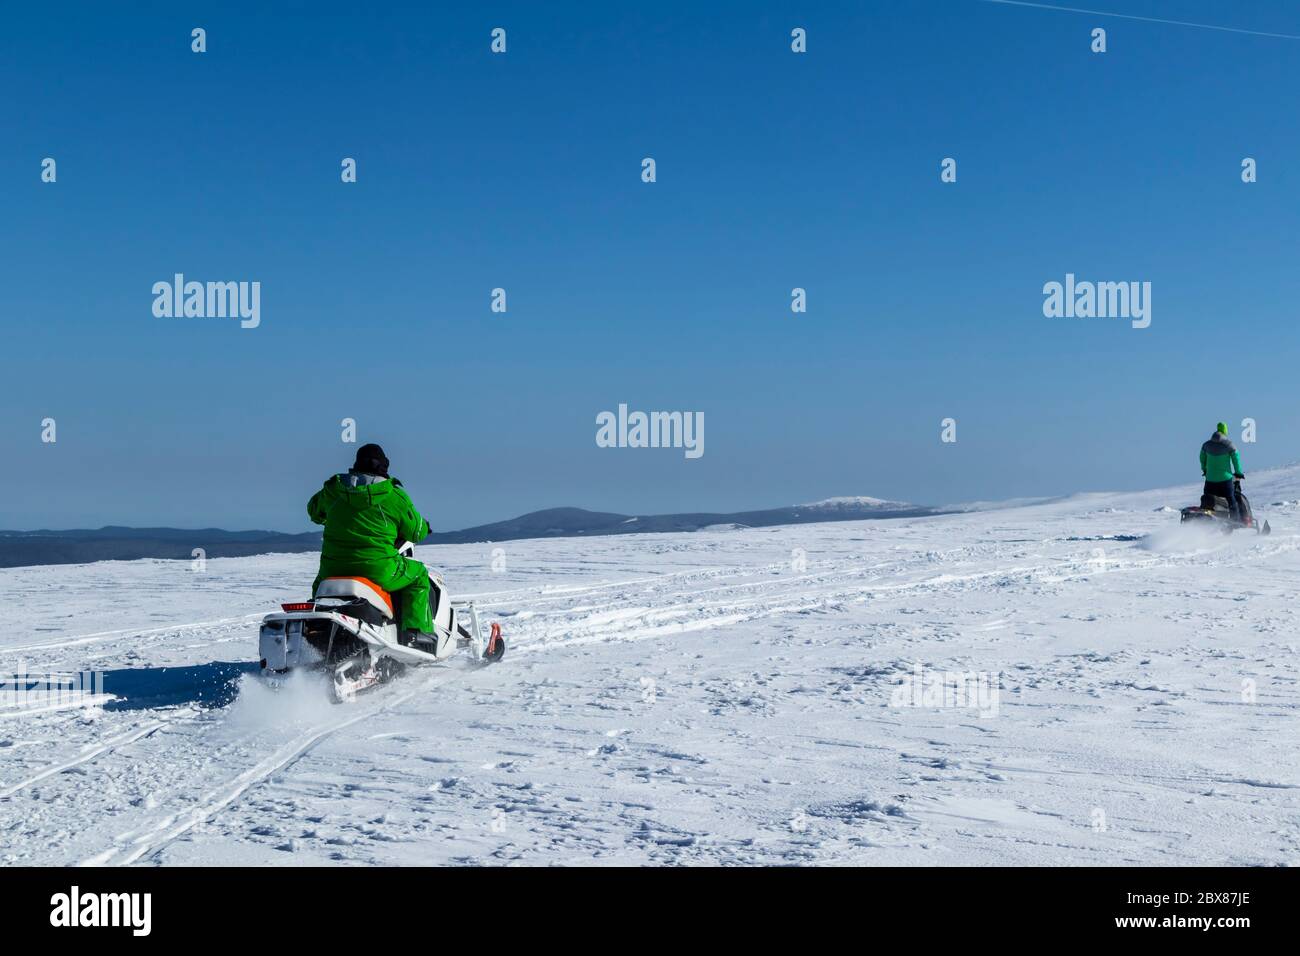 Rider on the snowmobile in the mountains ski resort. A man is riding snowmobile in mountains Stock Photo